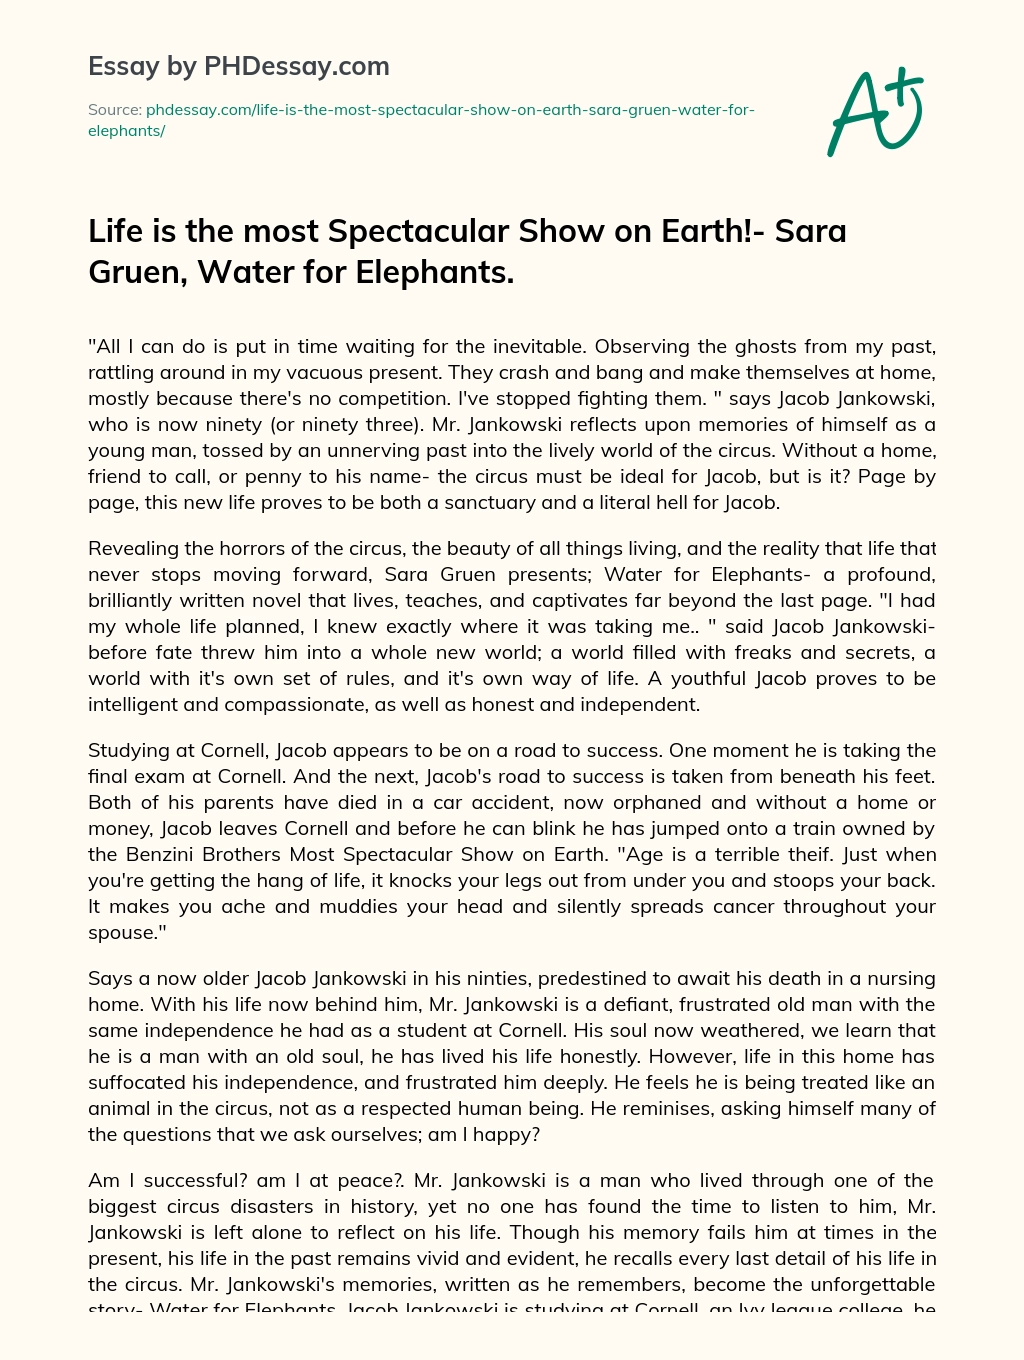 life is the most spectacular show on earth